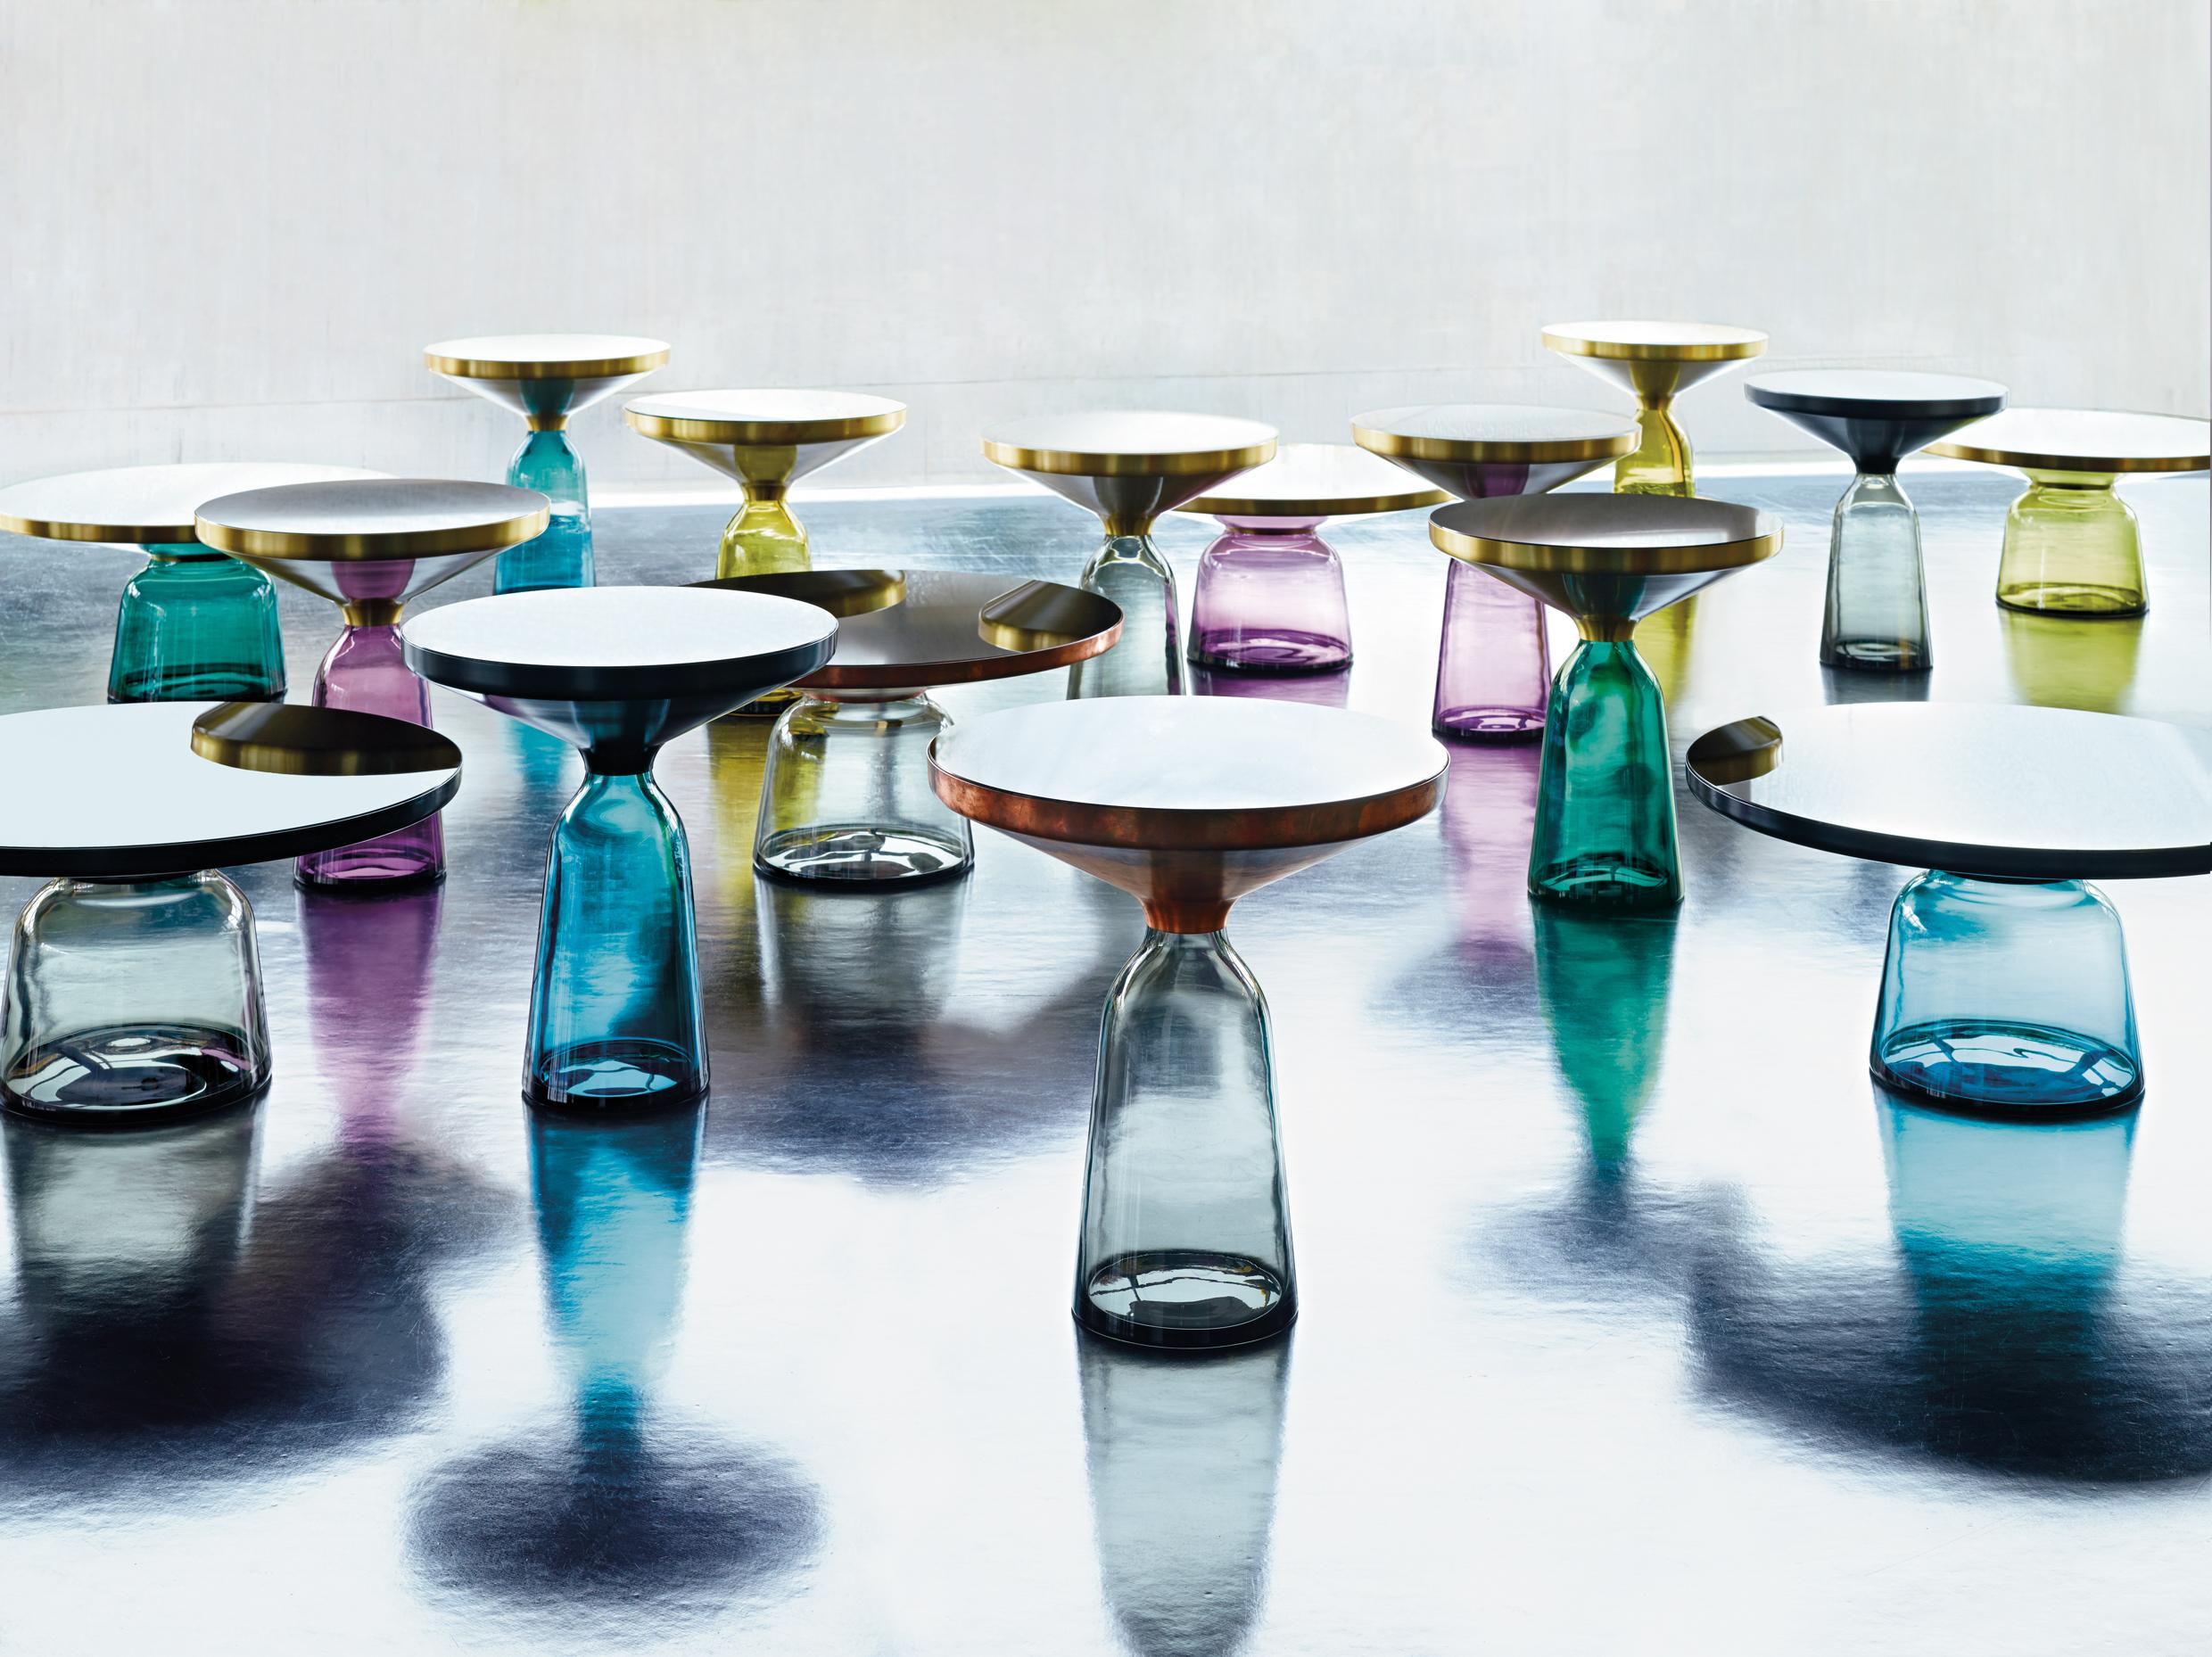 A modern classic as miniature: the bell table by Sebastian Herkner turns our perceptual habits on their head, using the lightweight, fragile material of glass as base for a metal top that seems to float above it. Hand blown in the traditional manner